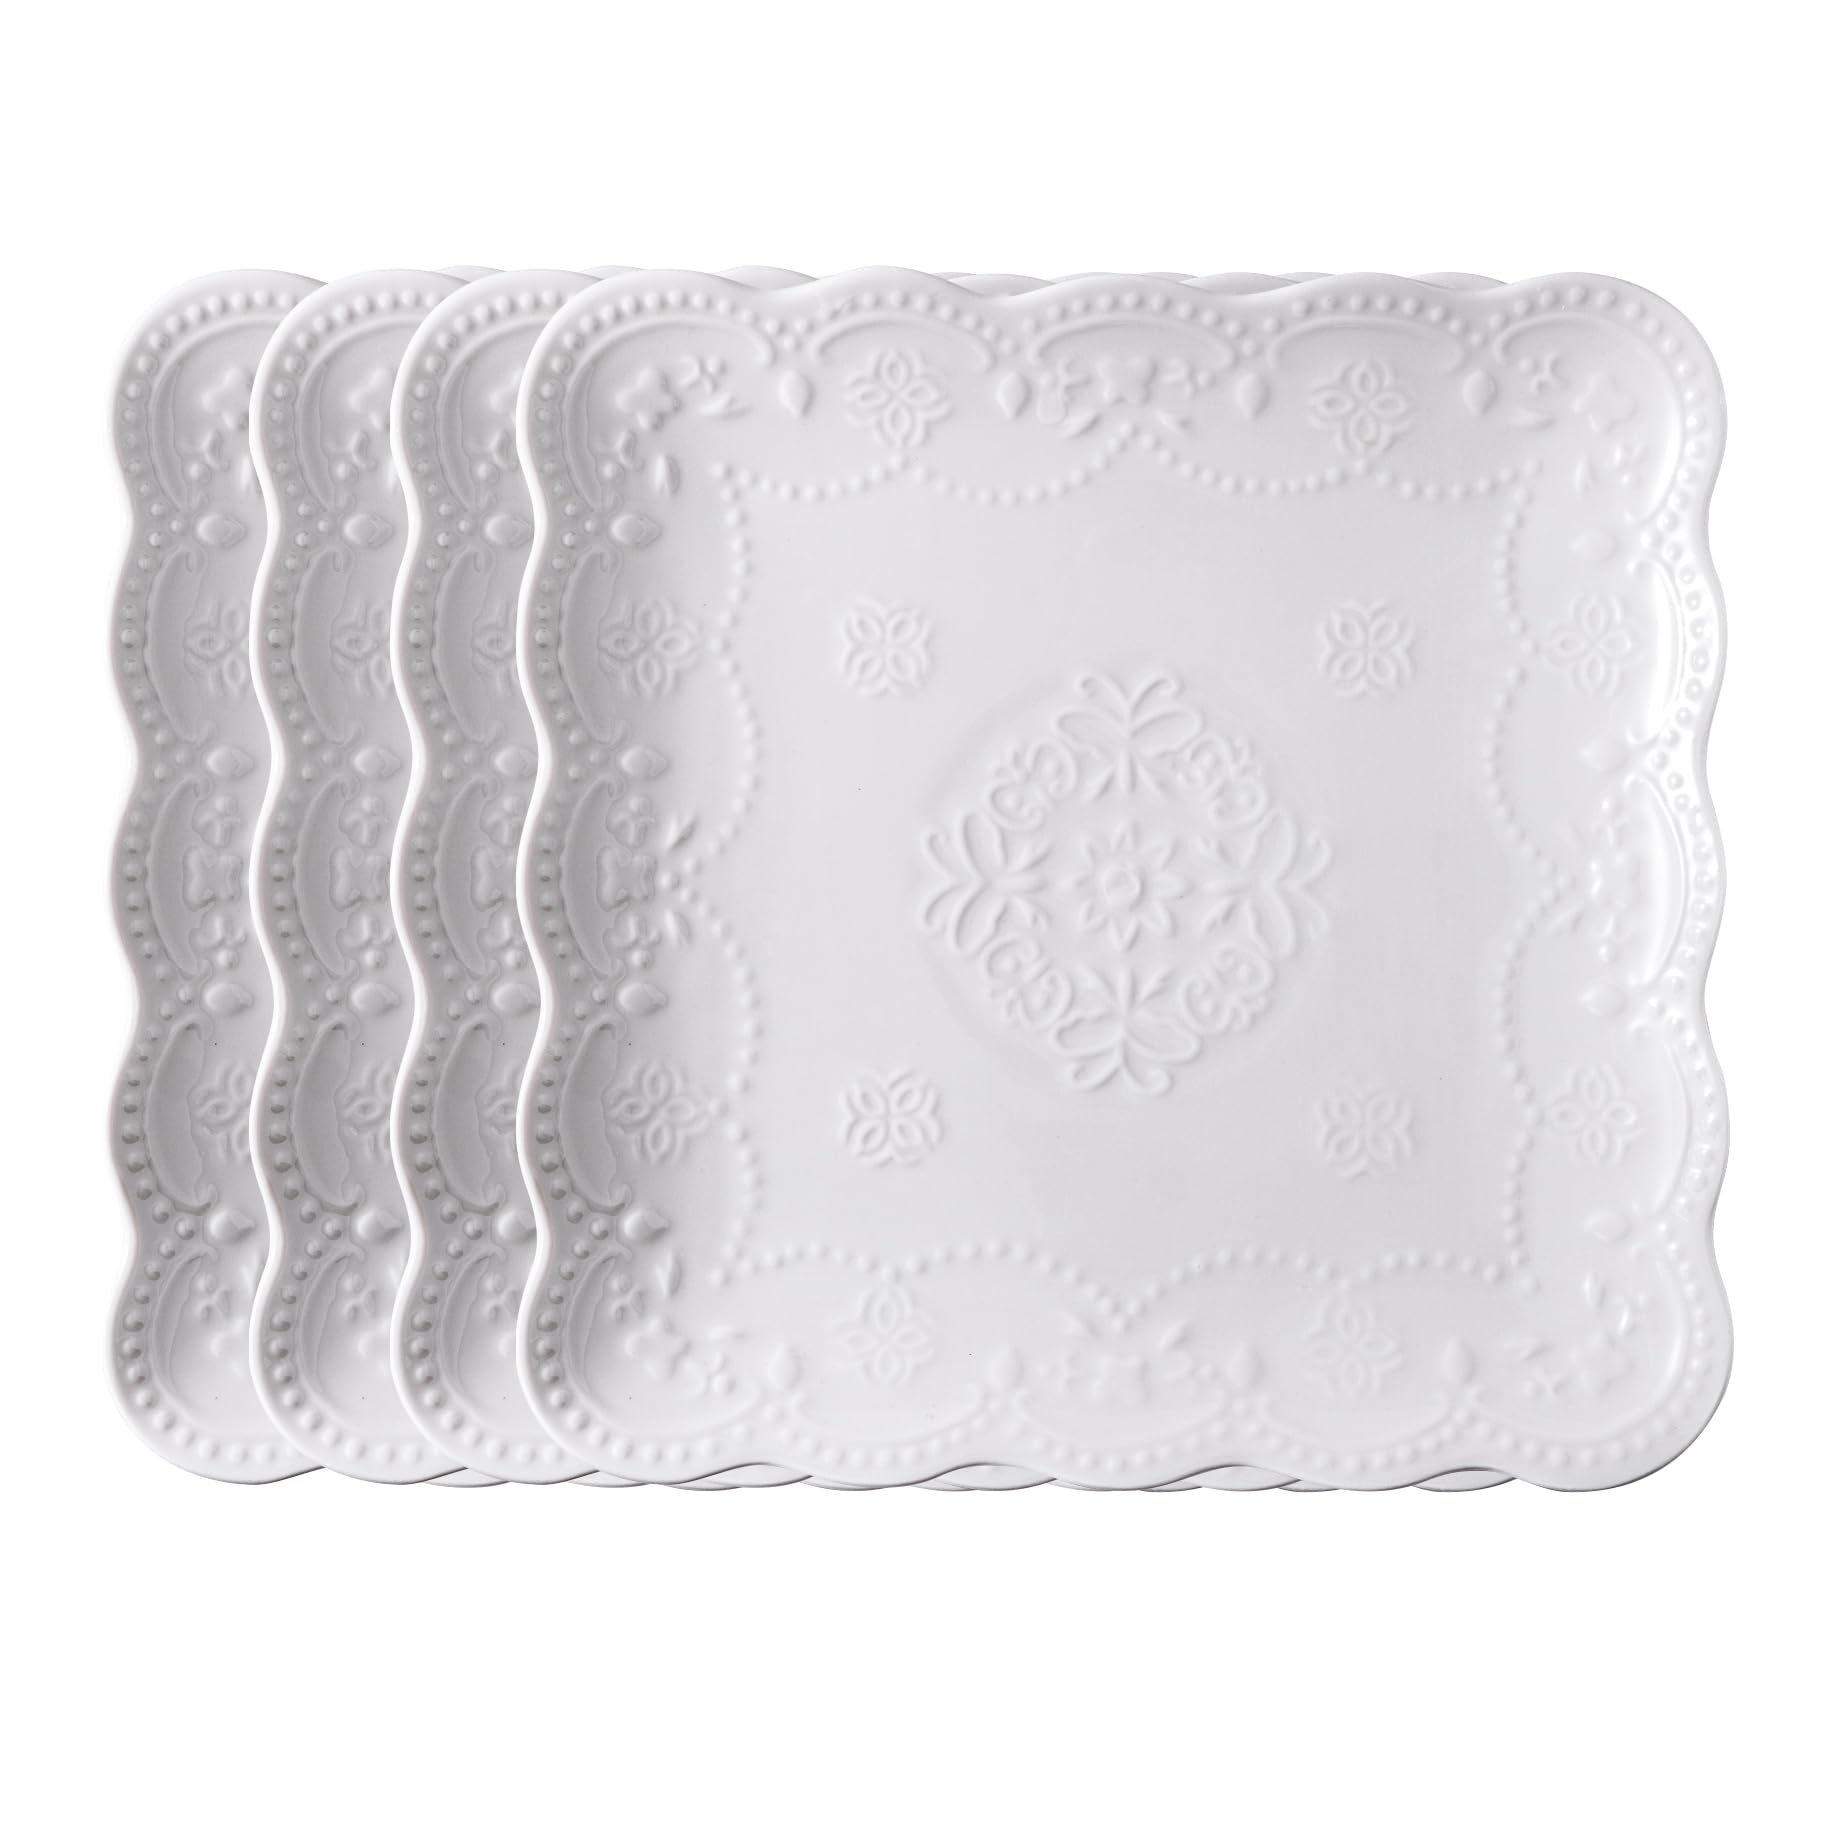 Jusalpha Square Embossed Lace Ceramic Plate-Tableware Set 4 Pieces (10 Inches, White)